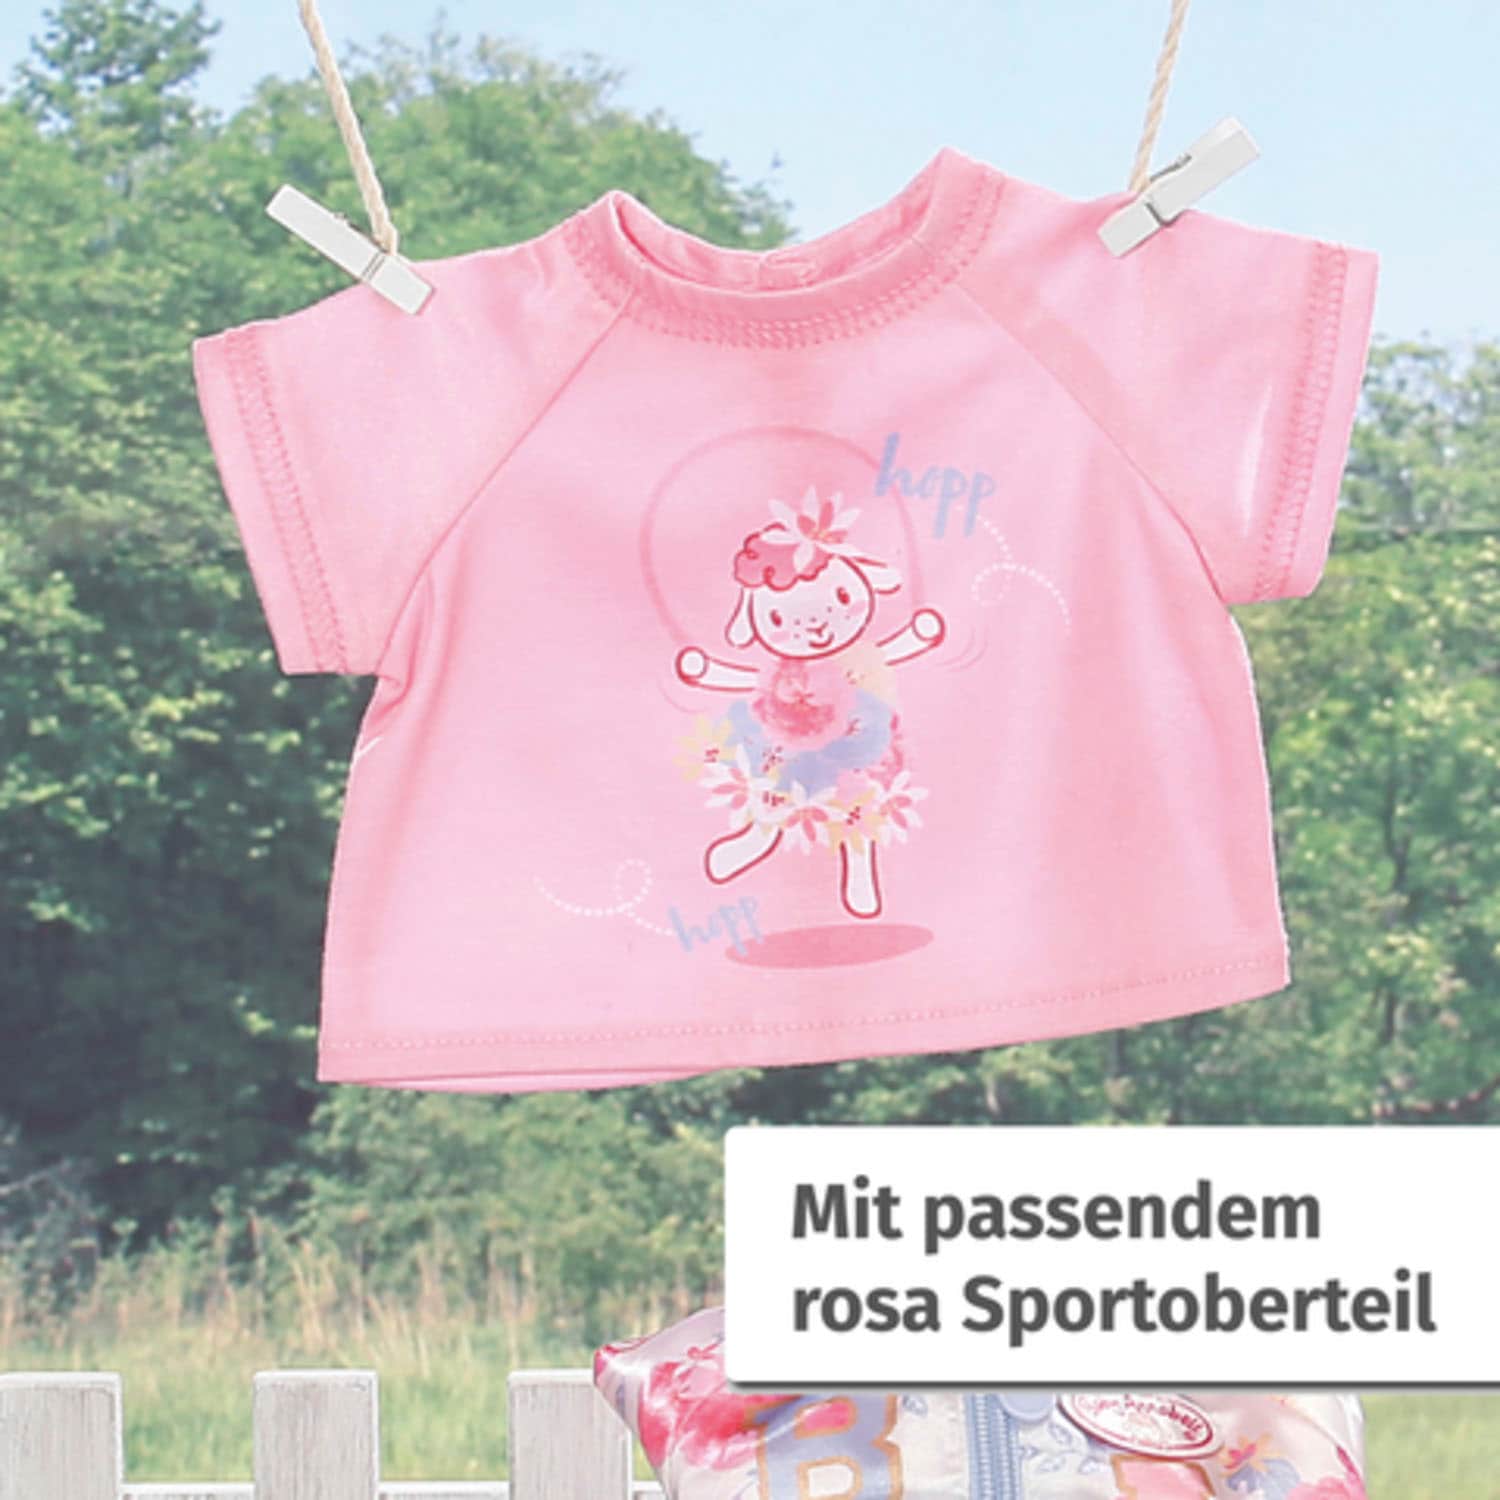 Baby Annabell Puppenkleidung »Deluxe Outdoor Set, 43 cm«